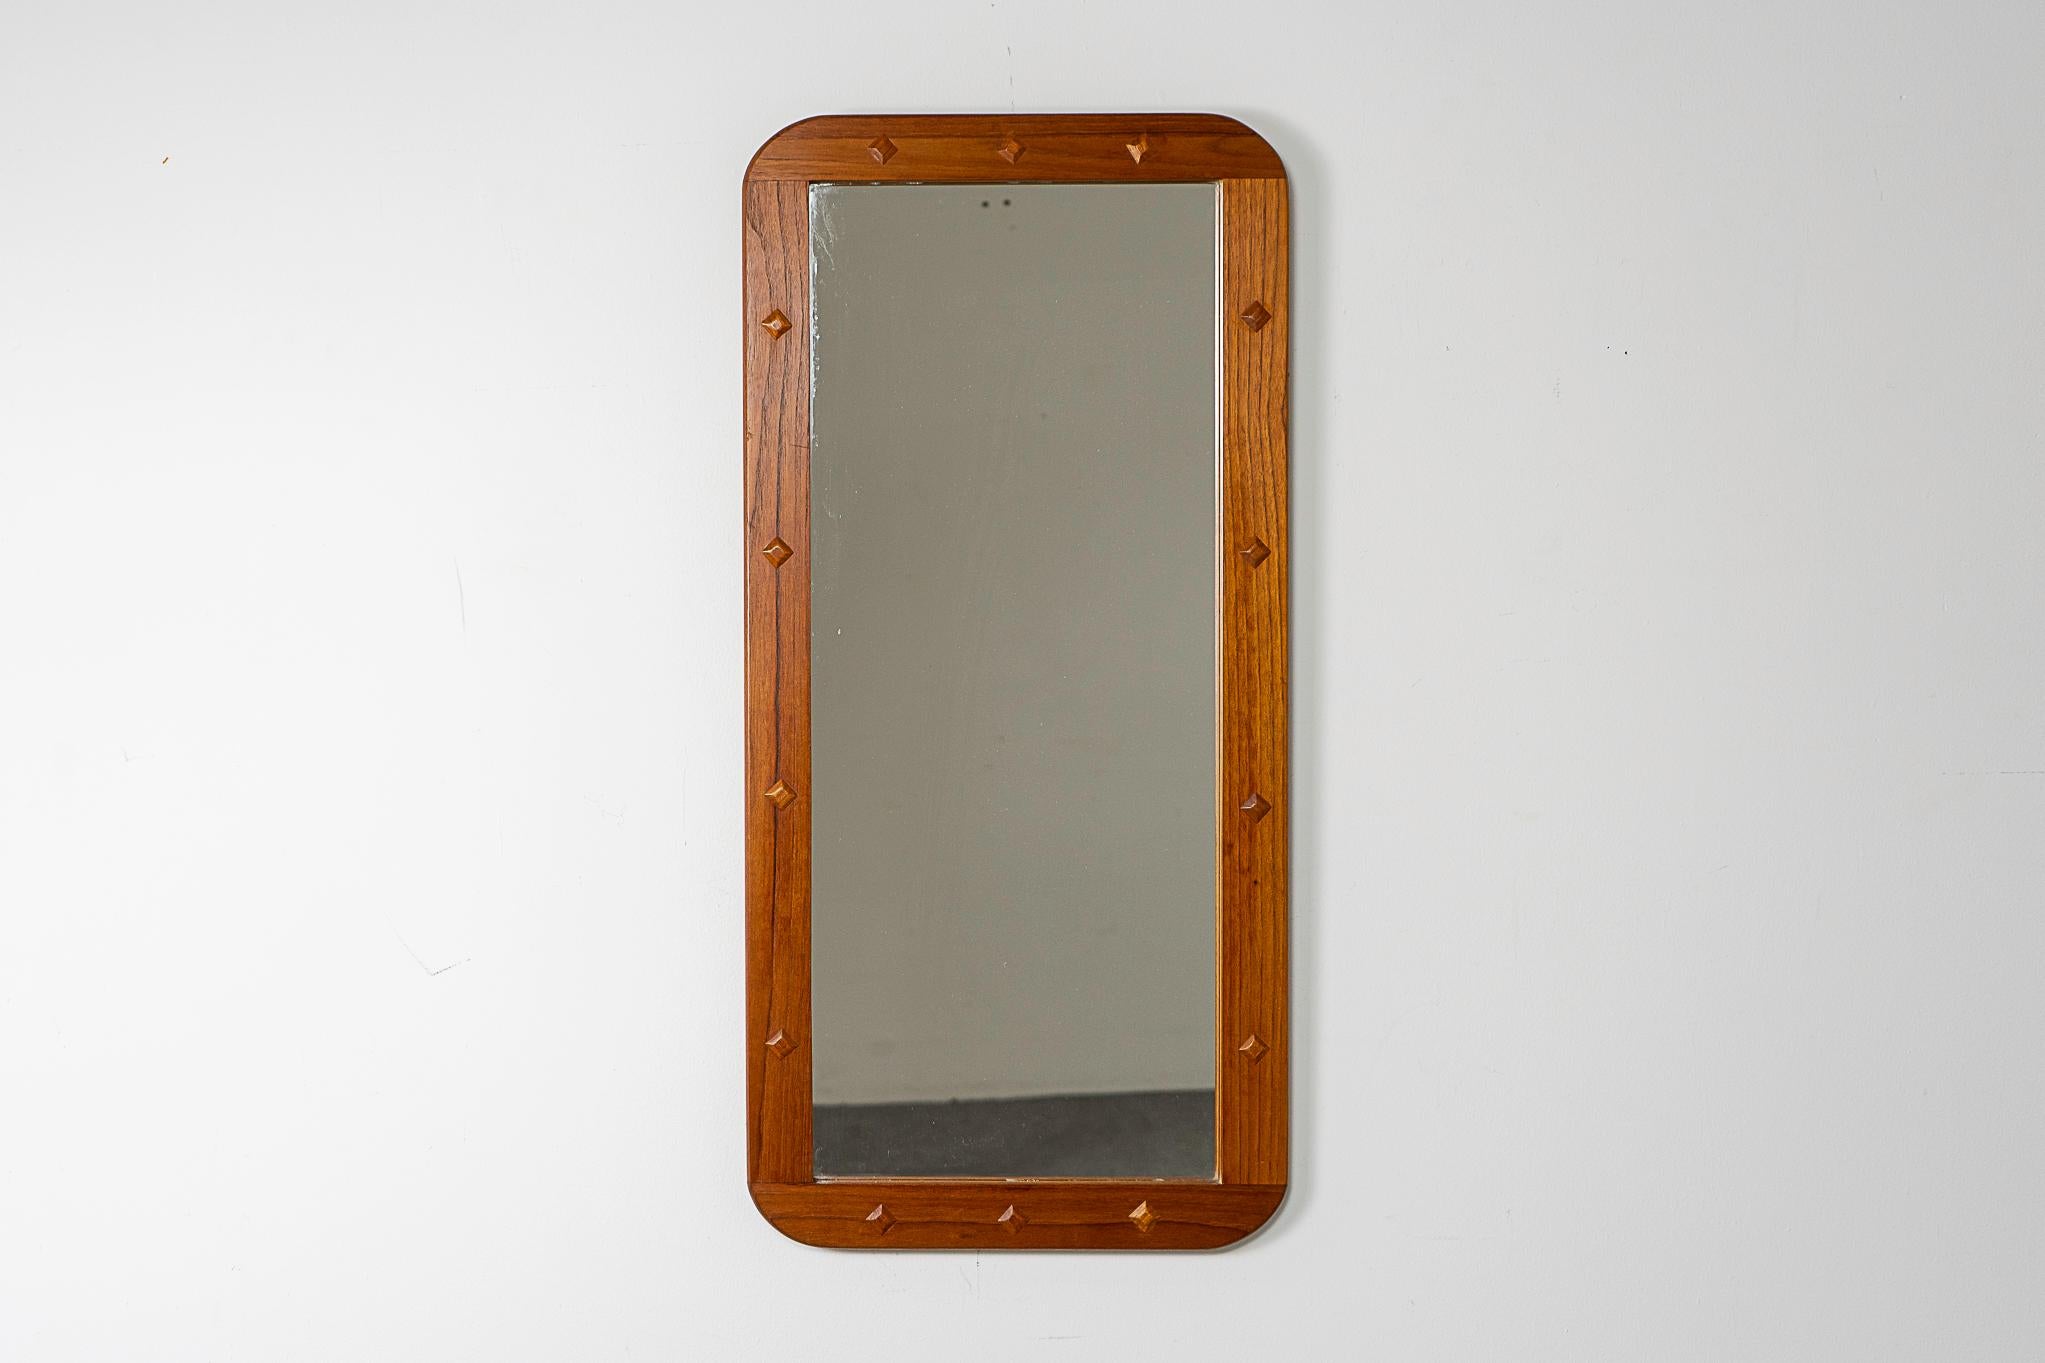 Teak mid-century mirror, circa 1960's. Solid wood frame with stunning grain and diamond relief details. Glass is in nice condtion.

Please inquire for remote and international shipping rates.
